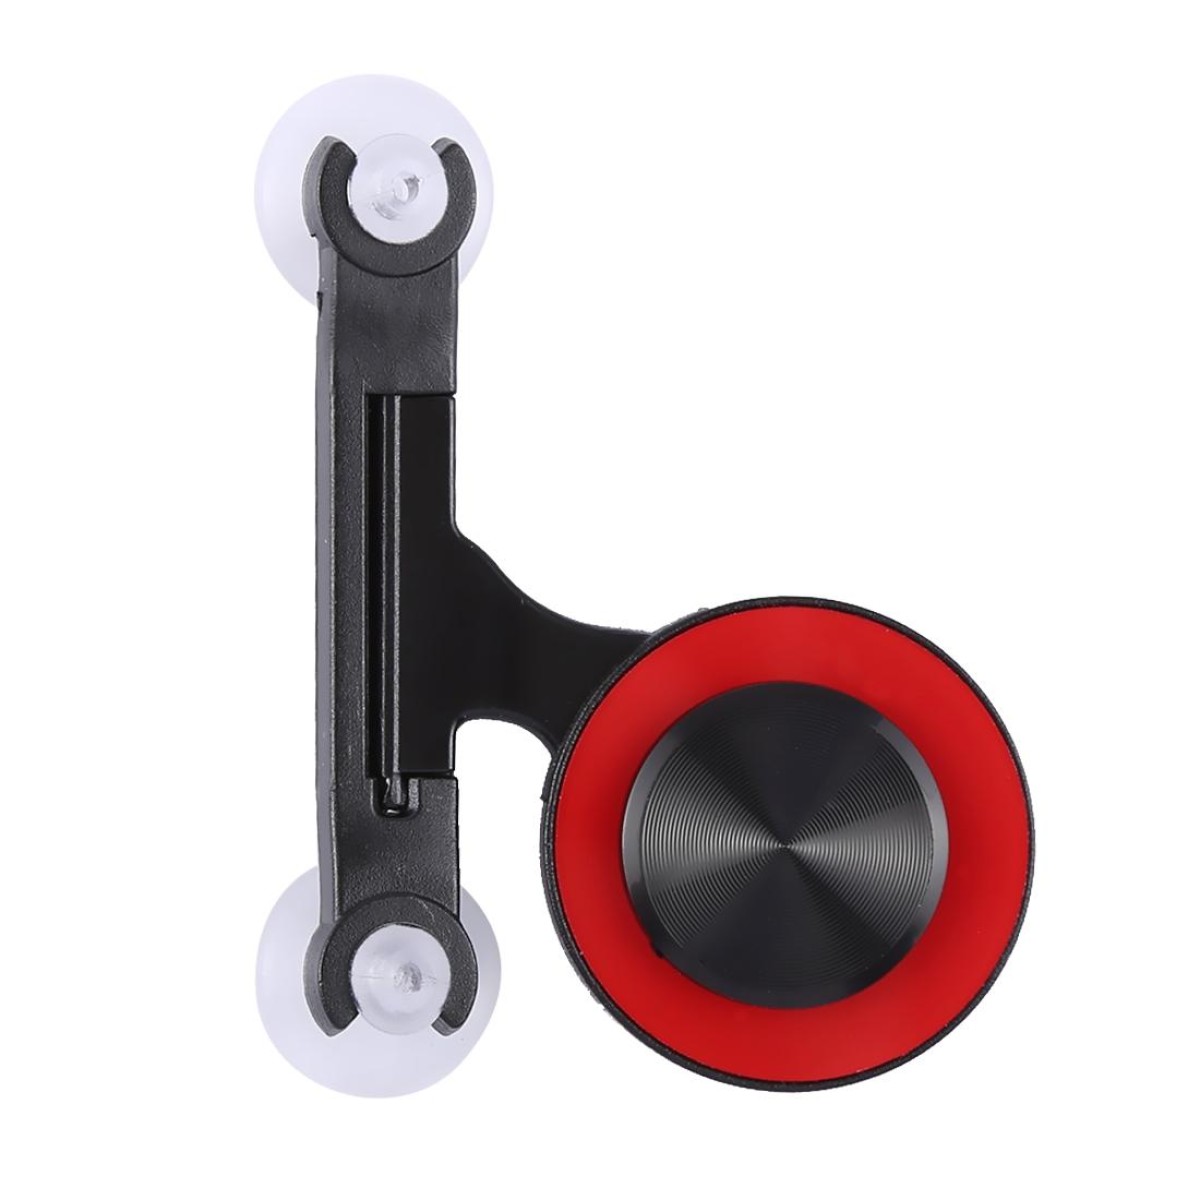 Q9 Direct Mobile Games Joystick Artifact Hand Travel Button Sucker for iPhone, Android Phone, Tablet(Red)